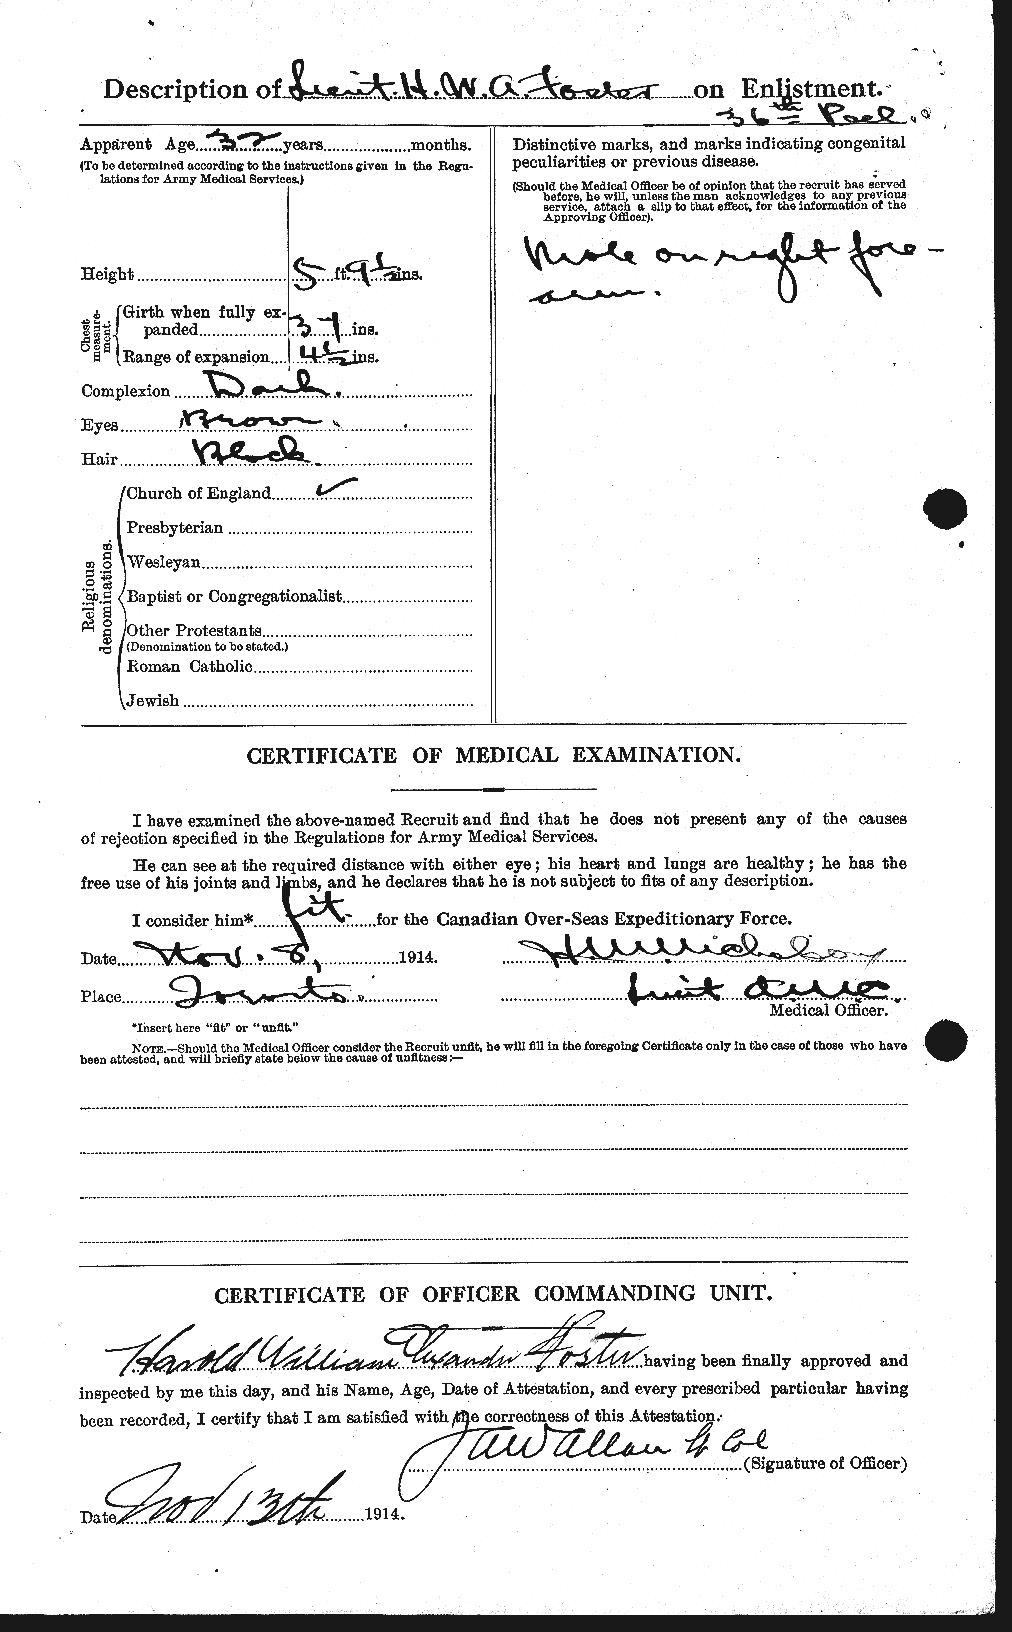 Personnel Records of the First World War - CEF 330732b